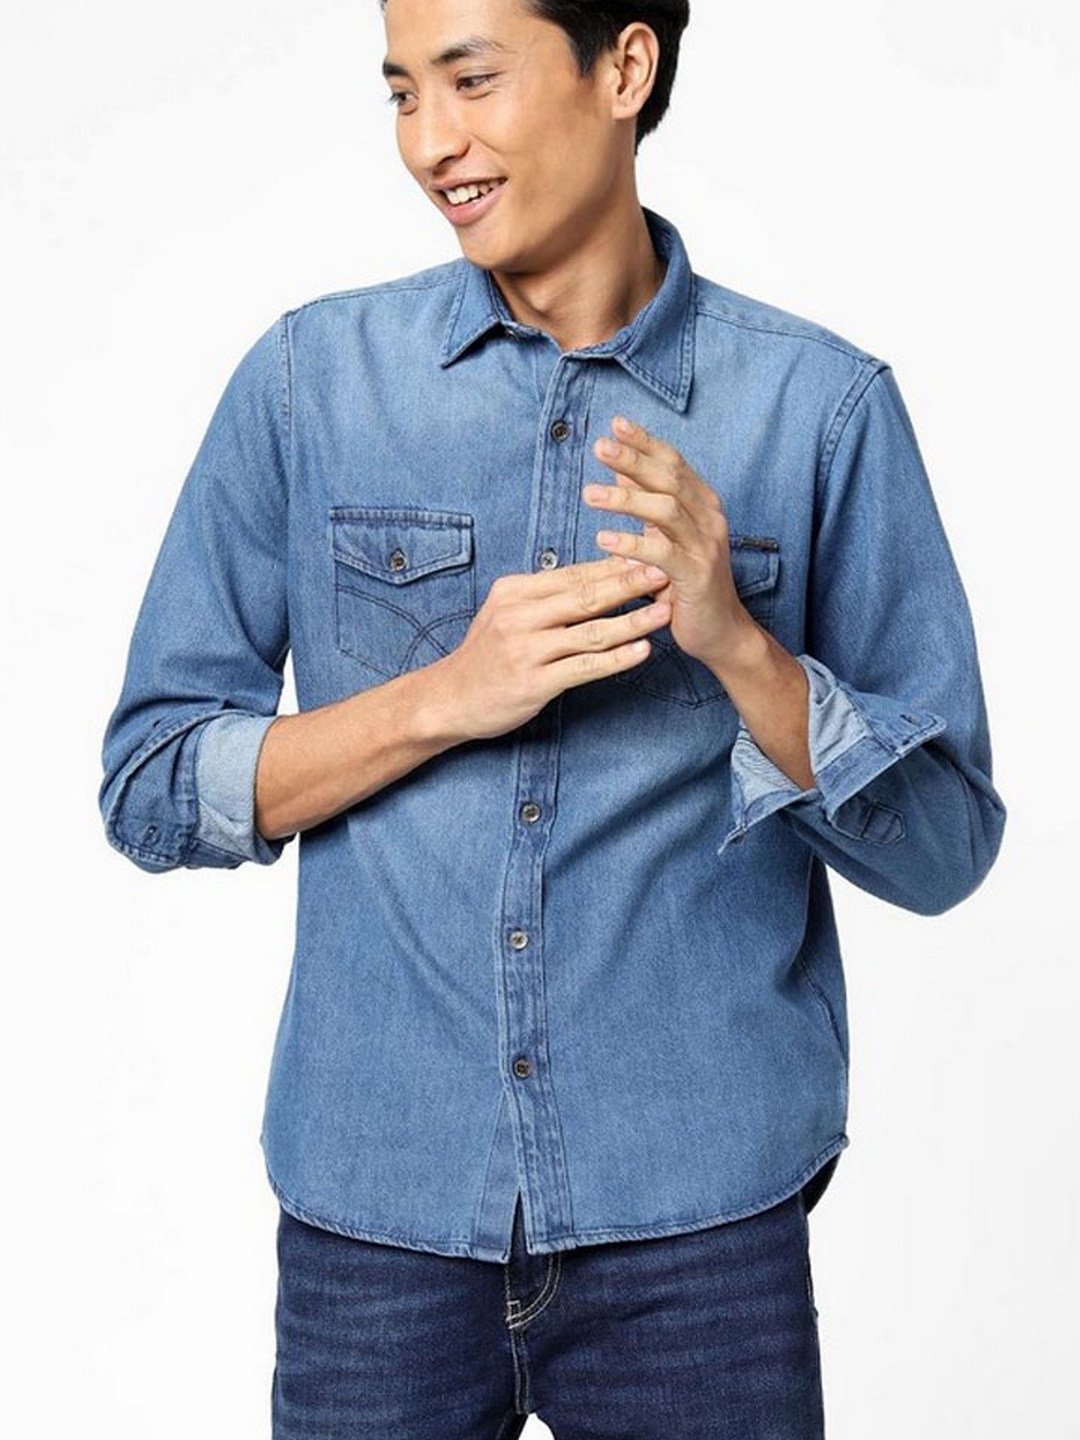 Men Denim Shirt in Bangalore at best price by Updates Clothing INC (North  Republic) - Justdial